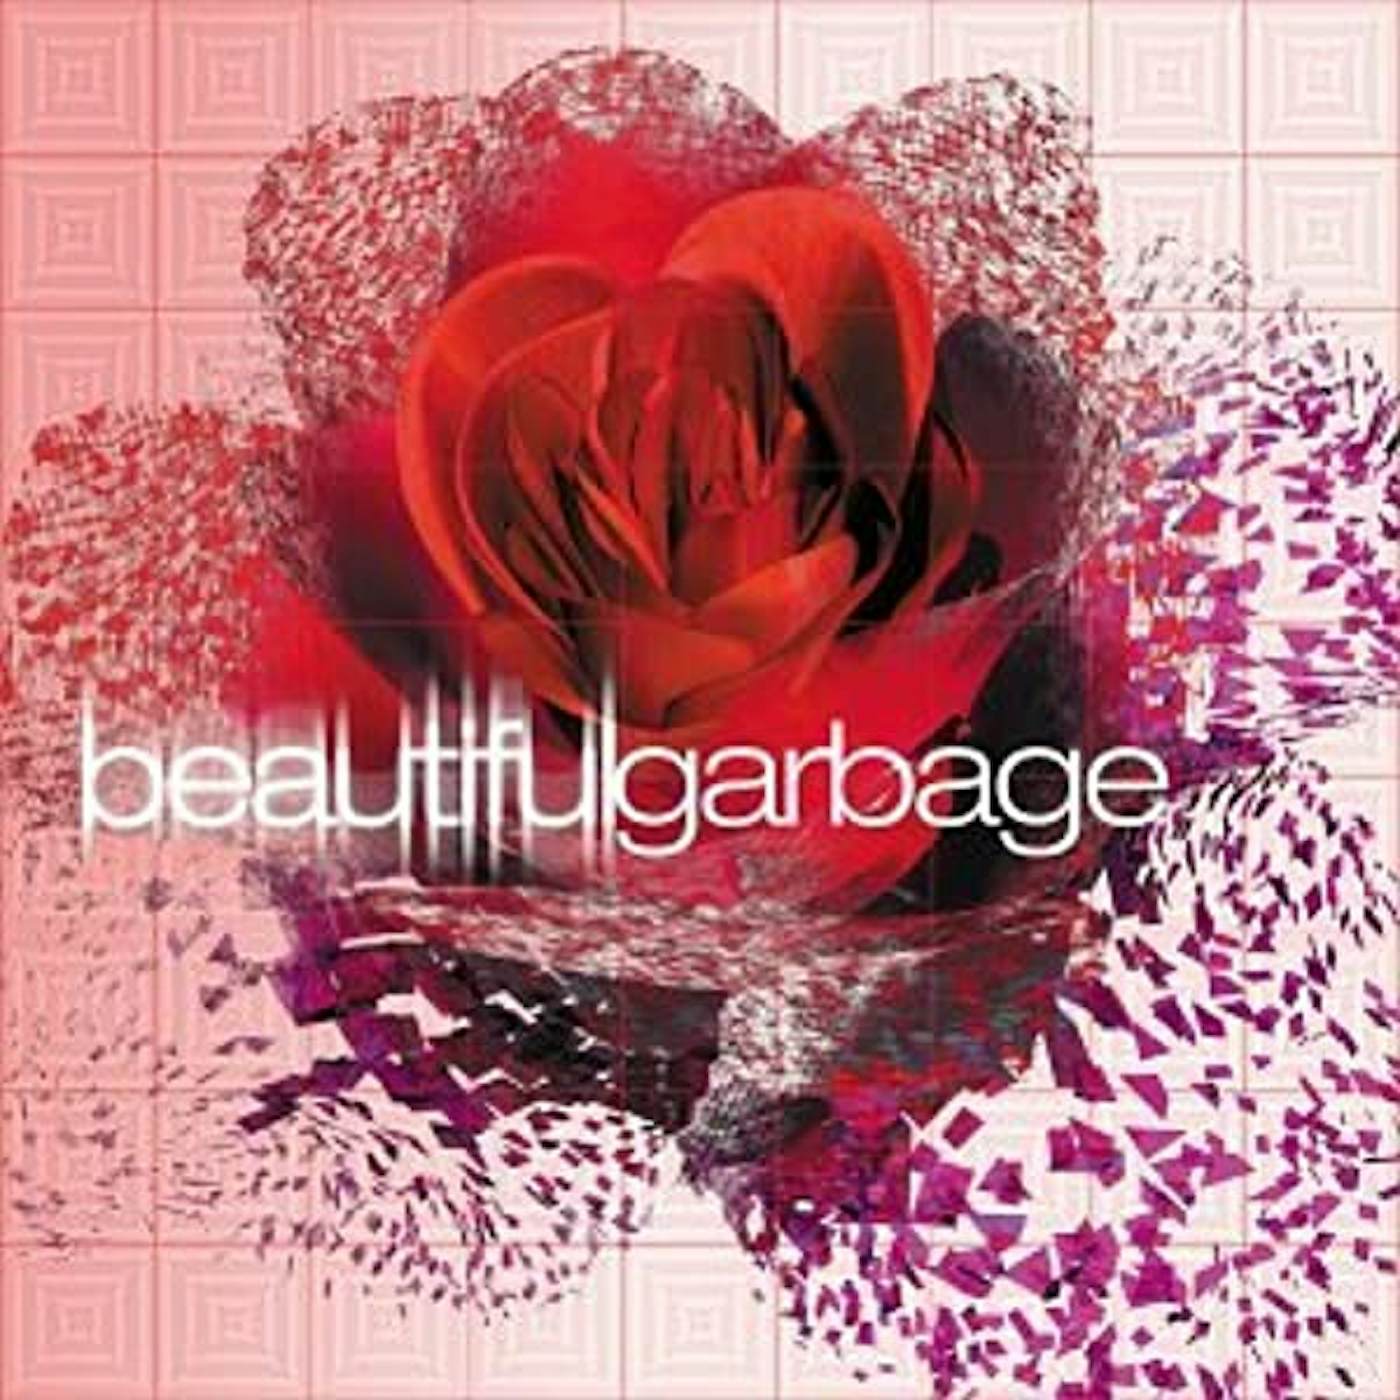 BEAUTIFULGARBAGE (3LP/180G/20TH ANNIVERSARY/DELUXE/REMASTERED/STICKERS/SETLIST/POSTER/IMPORT) Vinyl Record